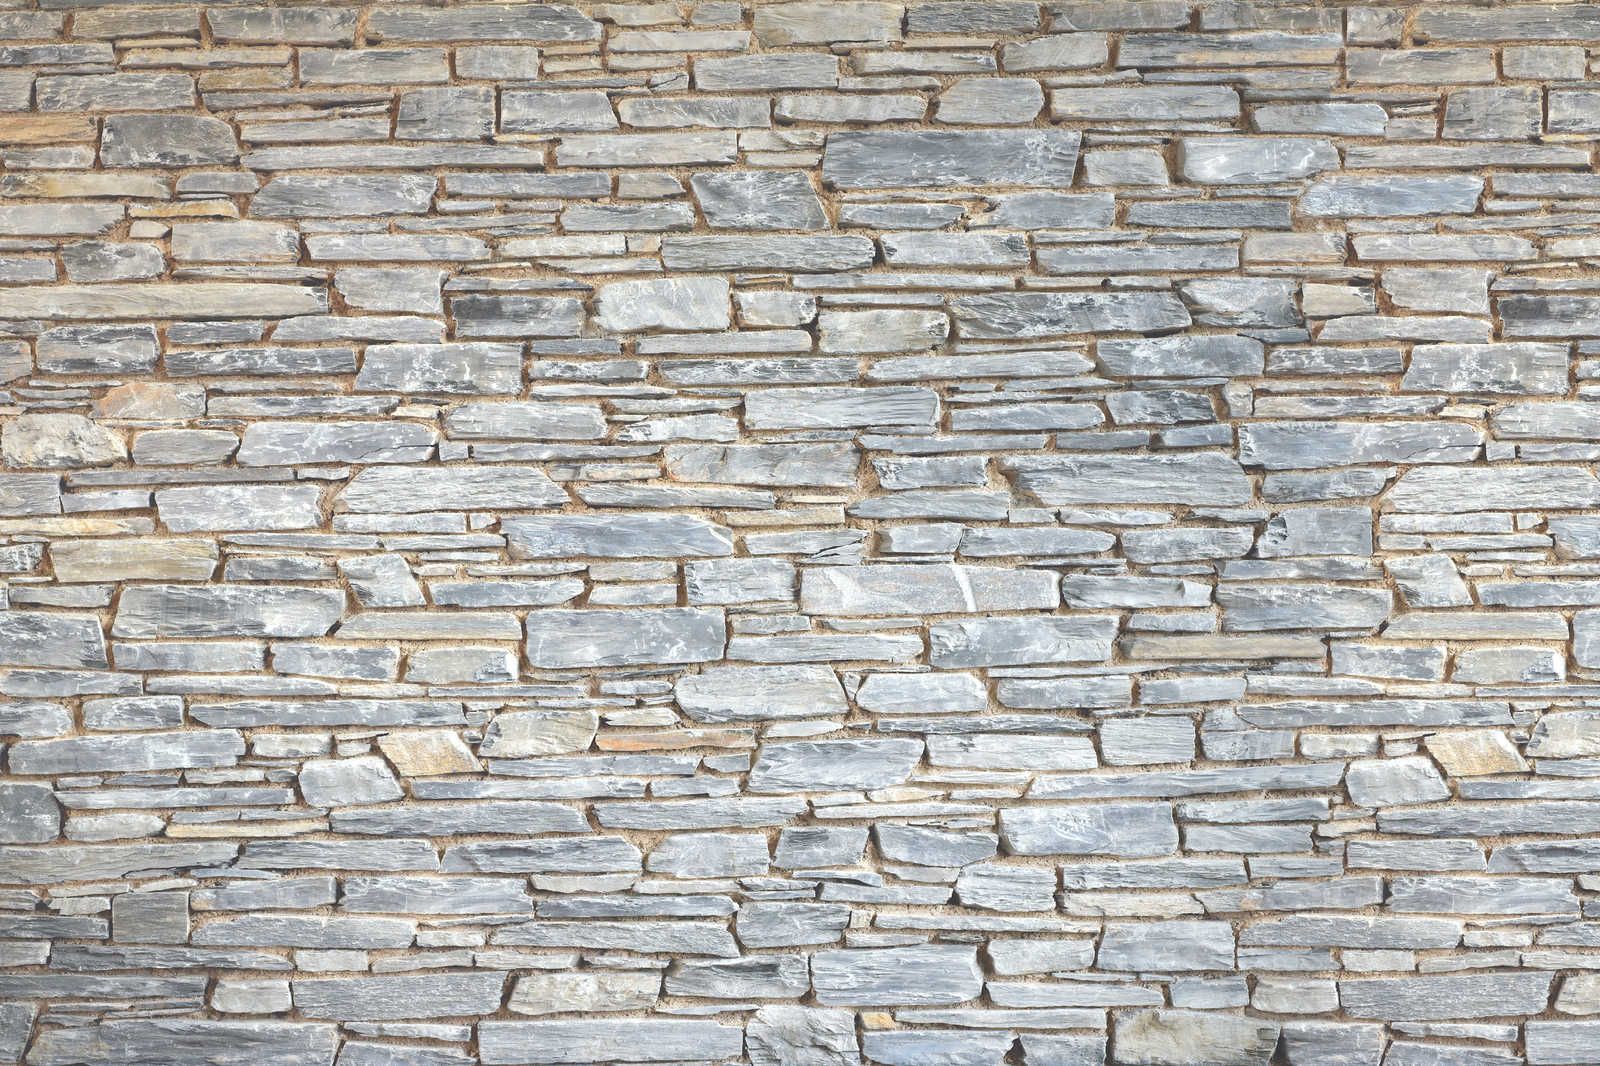             Stone Wall Canvas Painting Light Grey Nature Stone Look - 0.90 m x 0.60 m
        